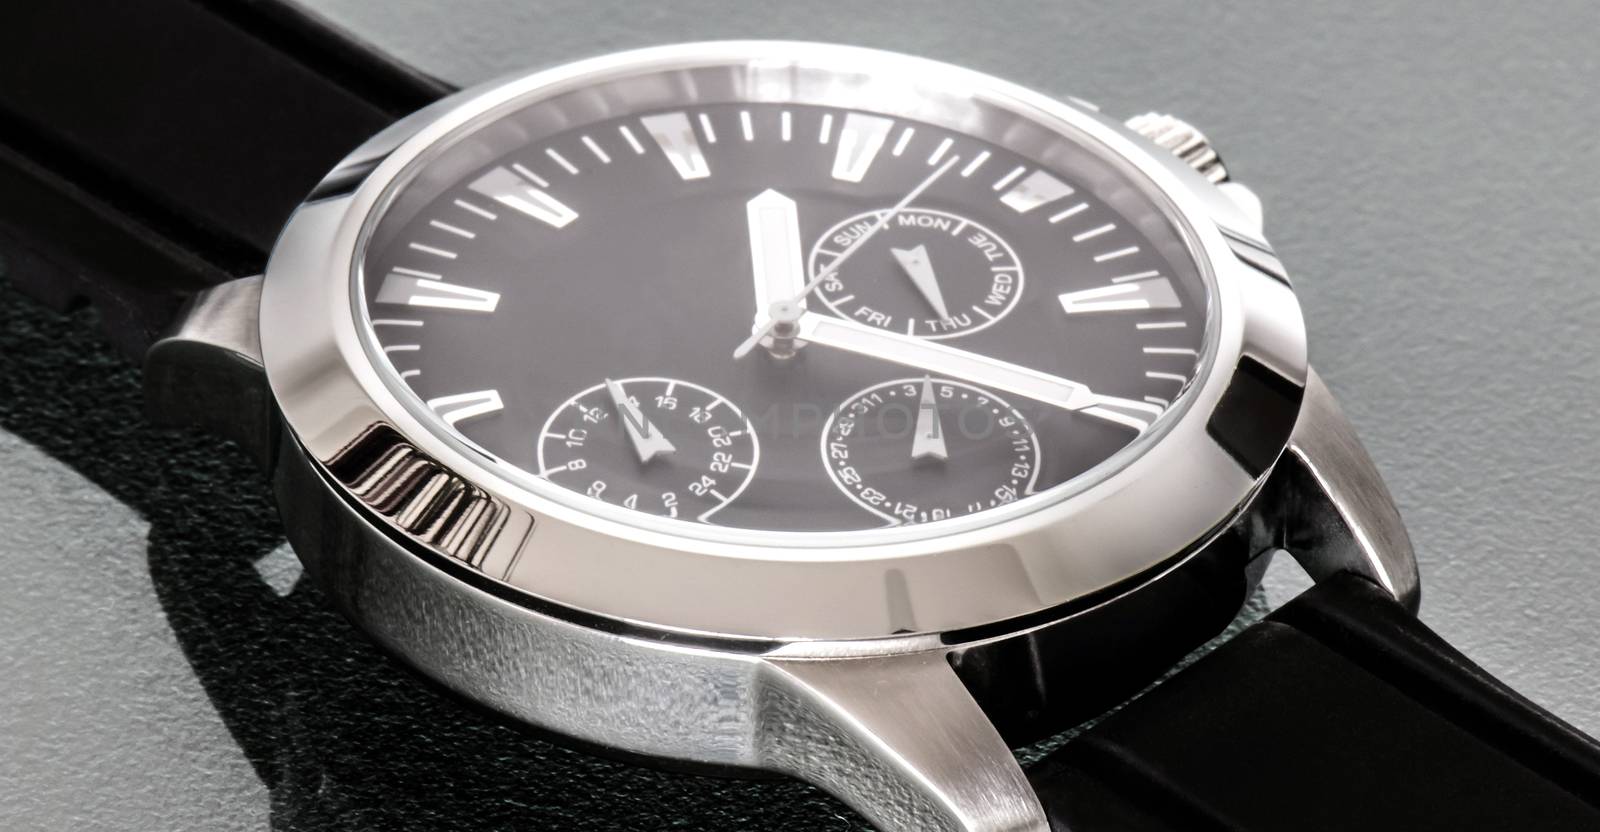 Silver colored stainless steel watch for men on a reflective background.